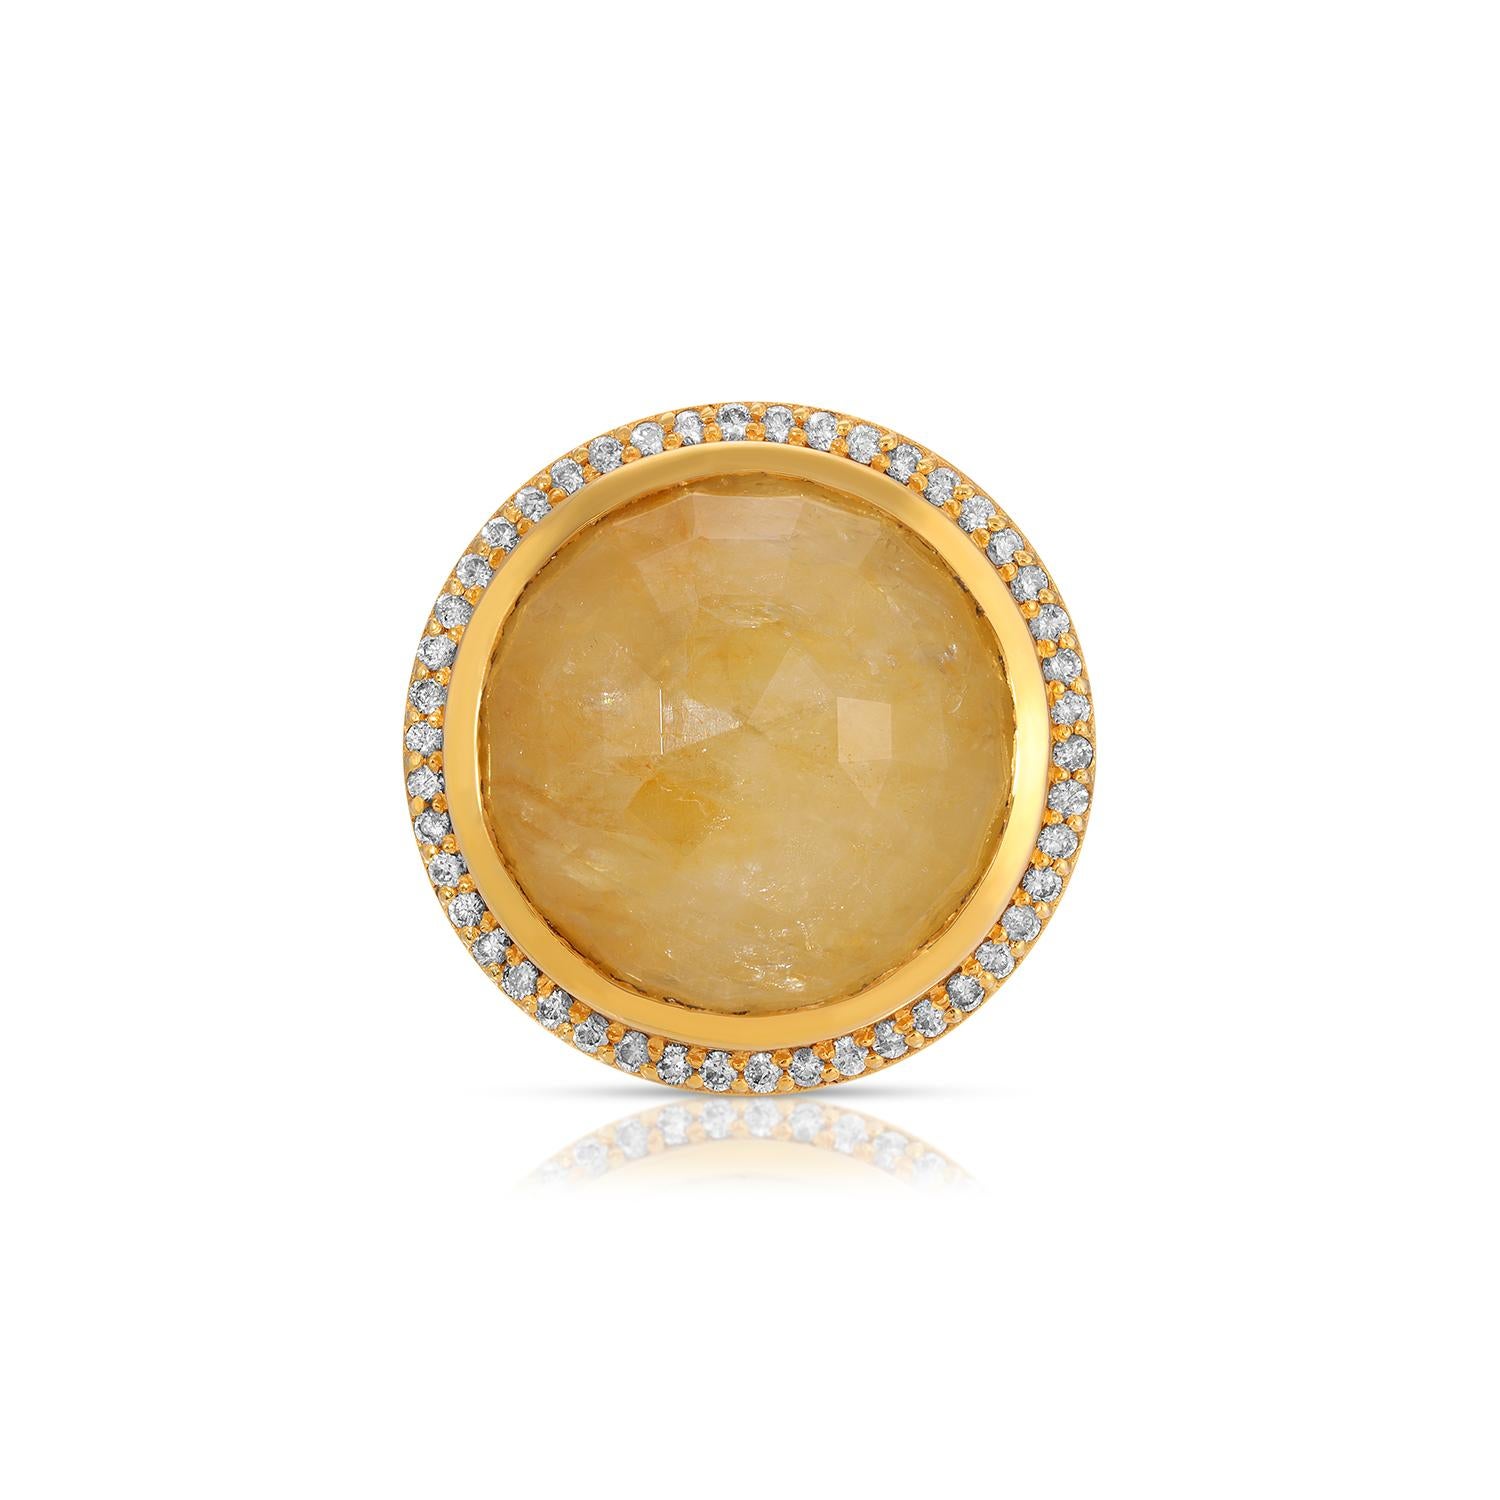 Yellow Sapphire Diamond UFO Cocktail Ring featuring a certified Burmese yellow sapphire and brilliant cut diamond cocktail ring crafted with exceptional attention to detail and creating a truly spectacular piece of high jewelry. The stunning